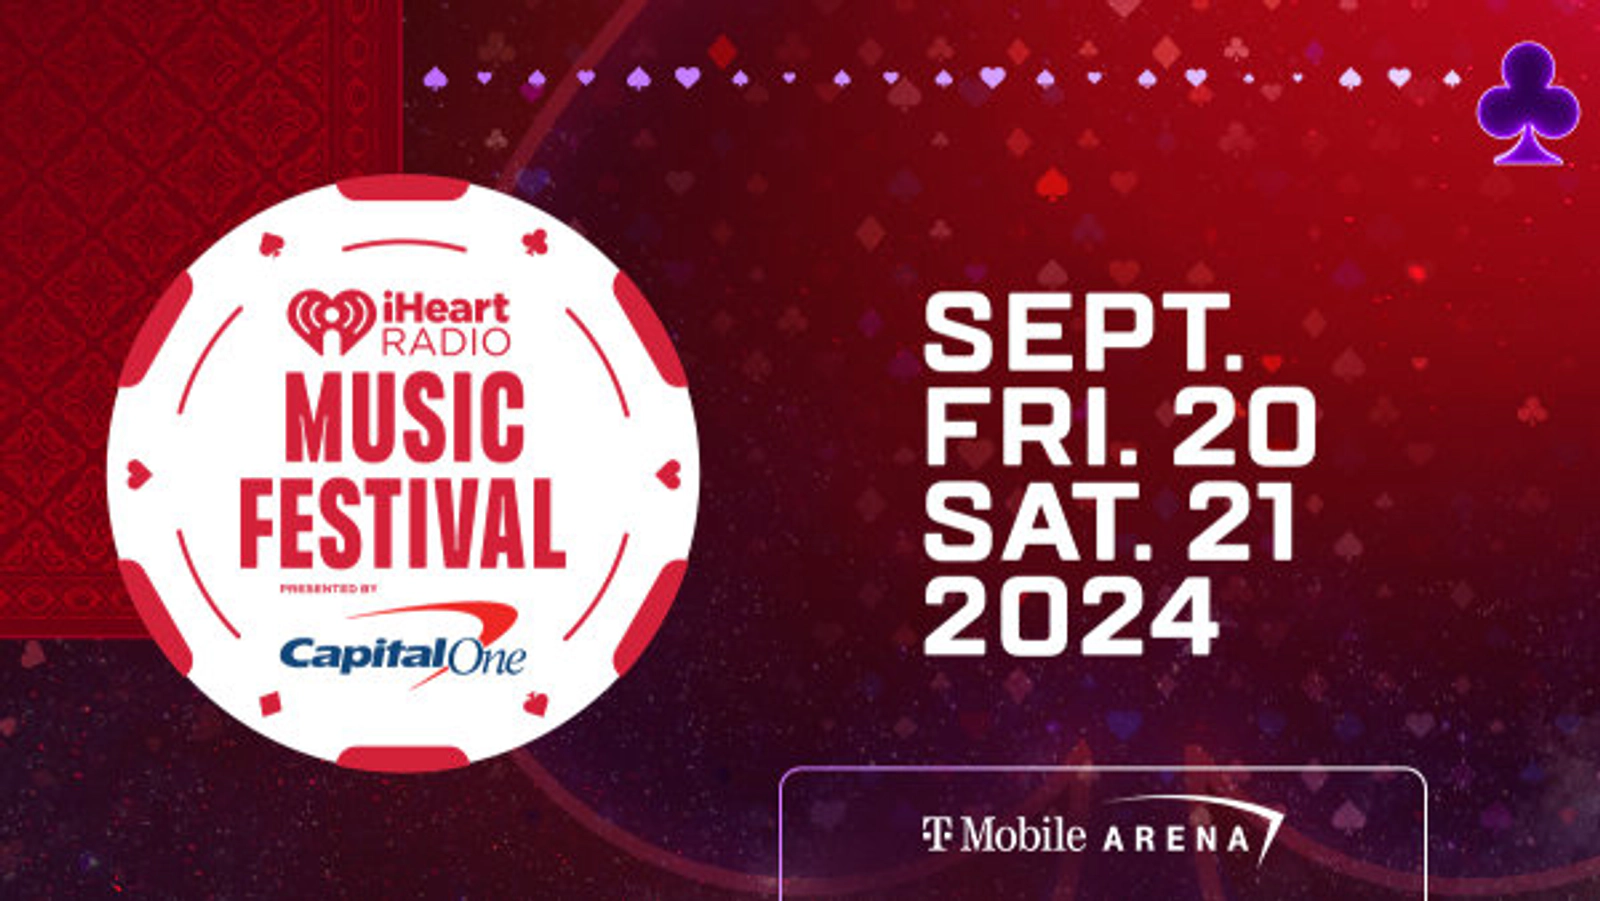 Win A Trip To Our iHeartRadio Music Festival 2024 And $1000!